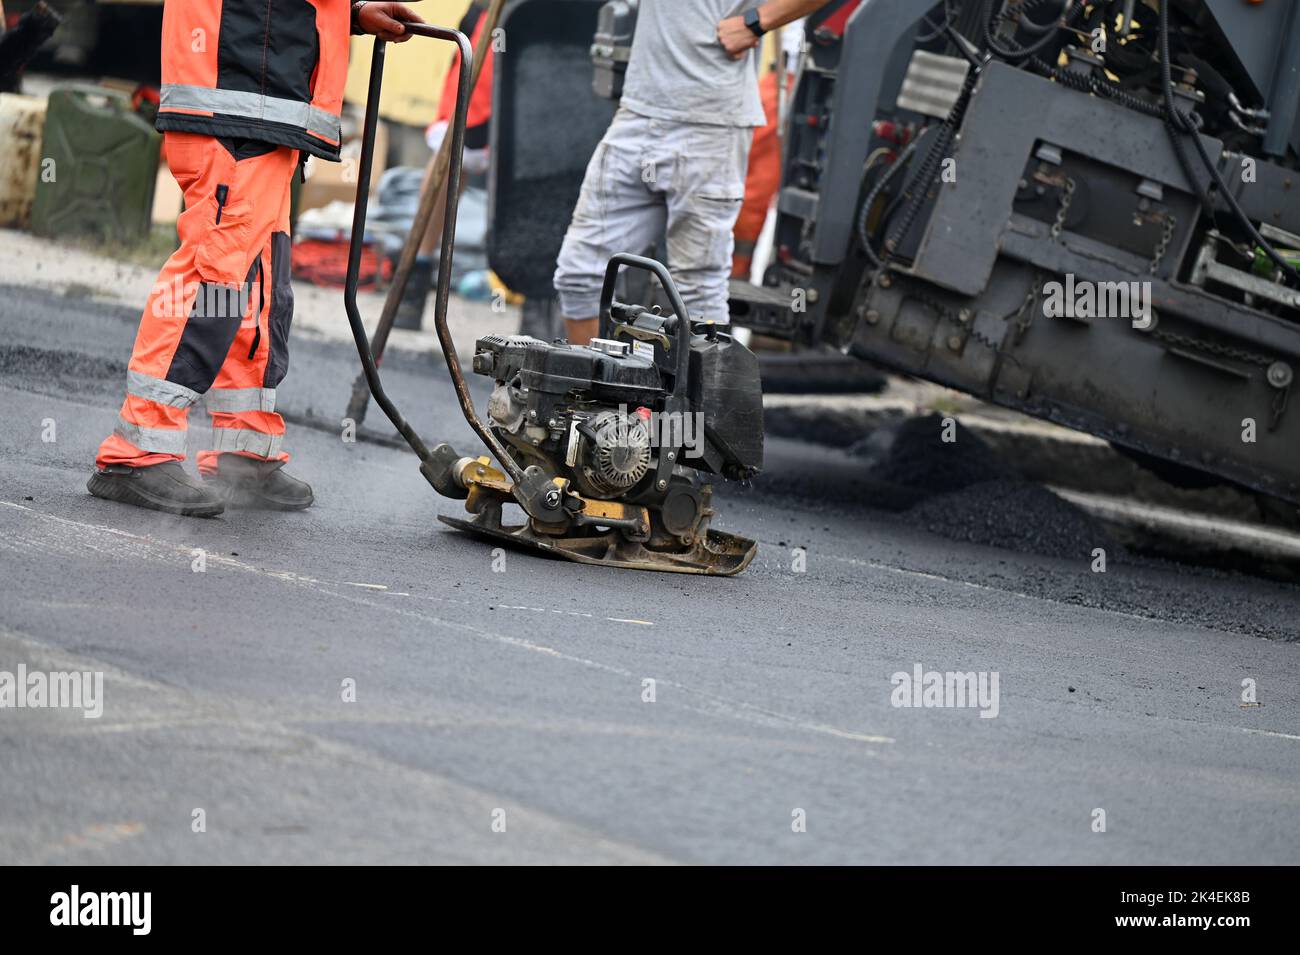 A plate compactor for compacting asphalt at a road construction site Stock Photo